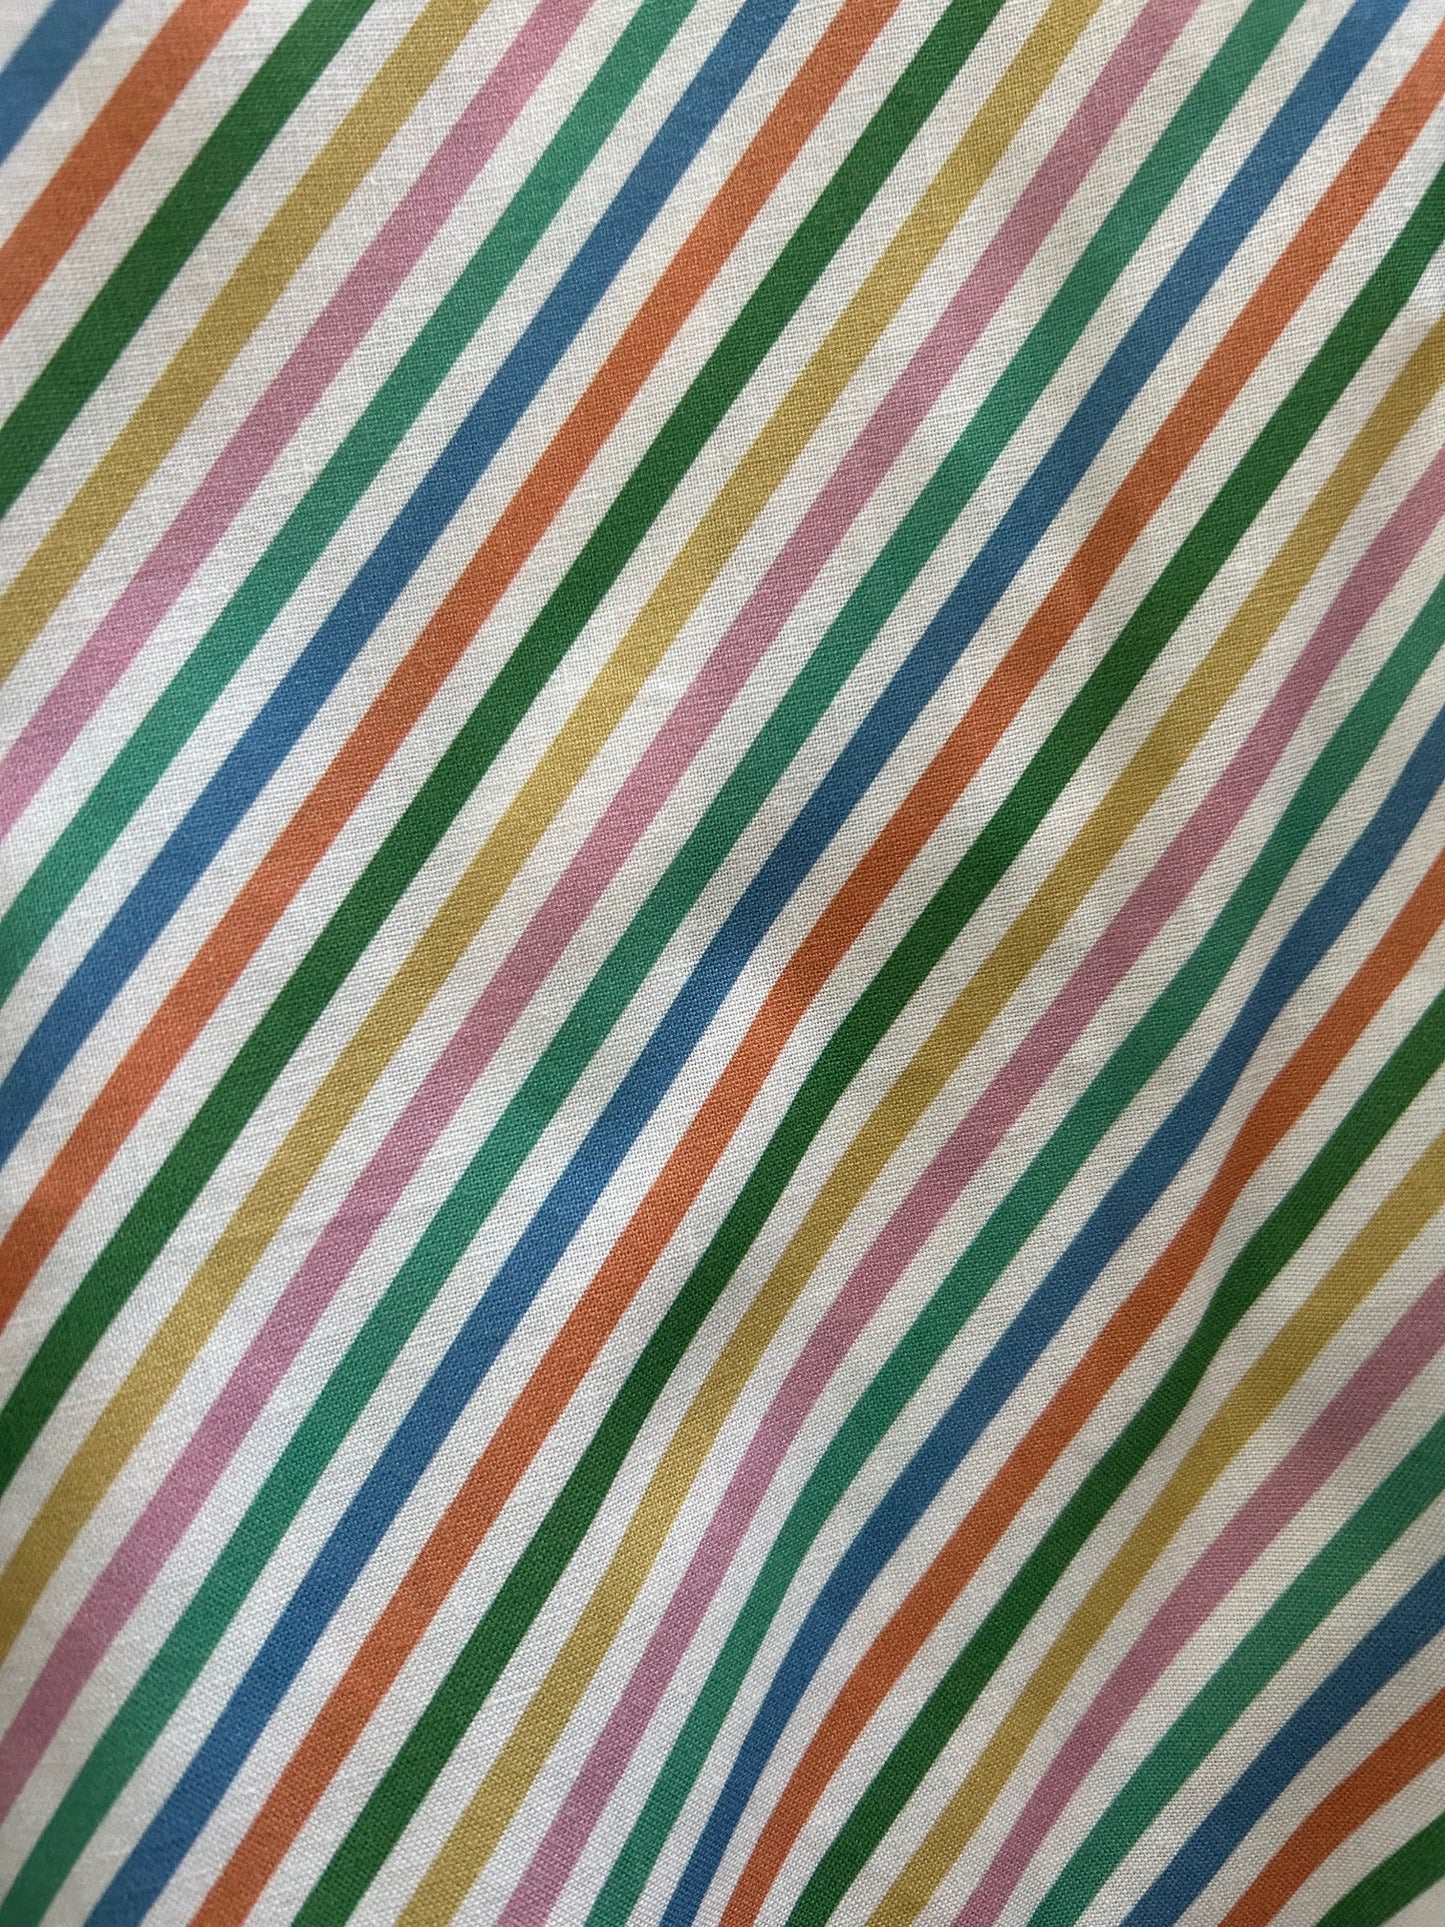 close up of the rainbow diagonal stripes